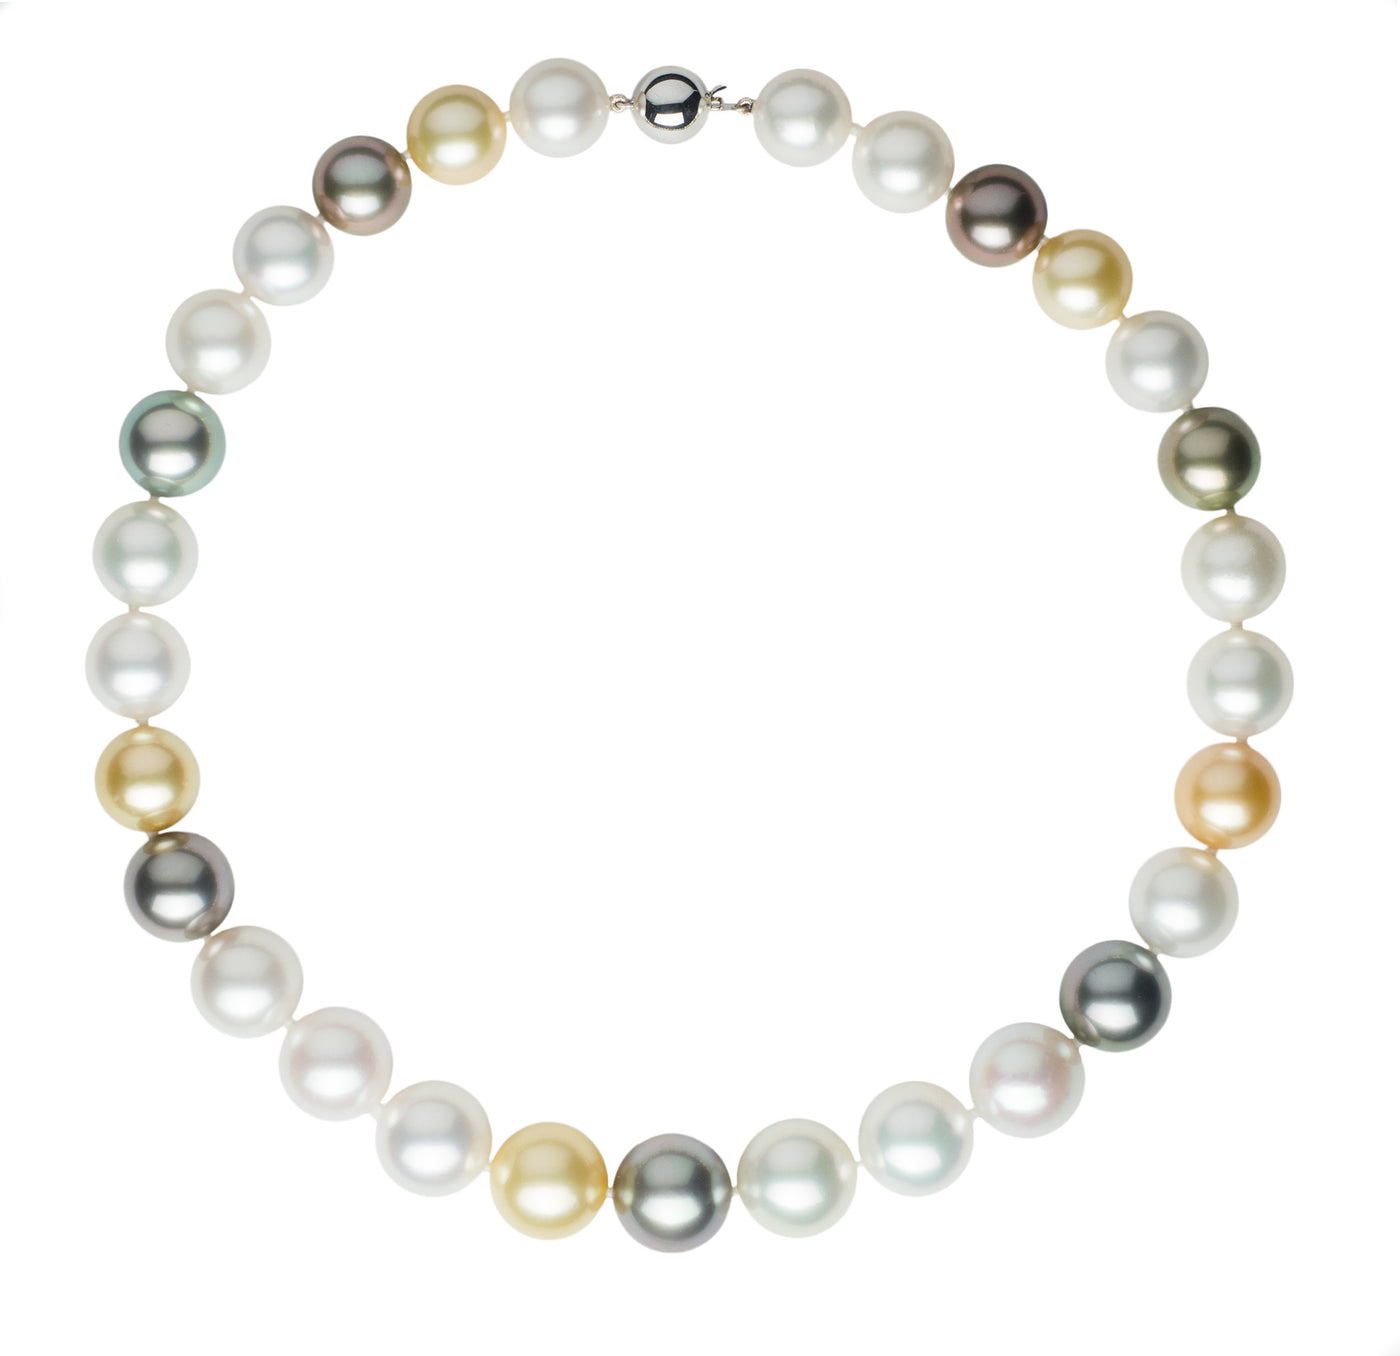 Multi-Color South Sea Pearl Strand Necklace Pearls by Shari